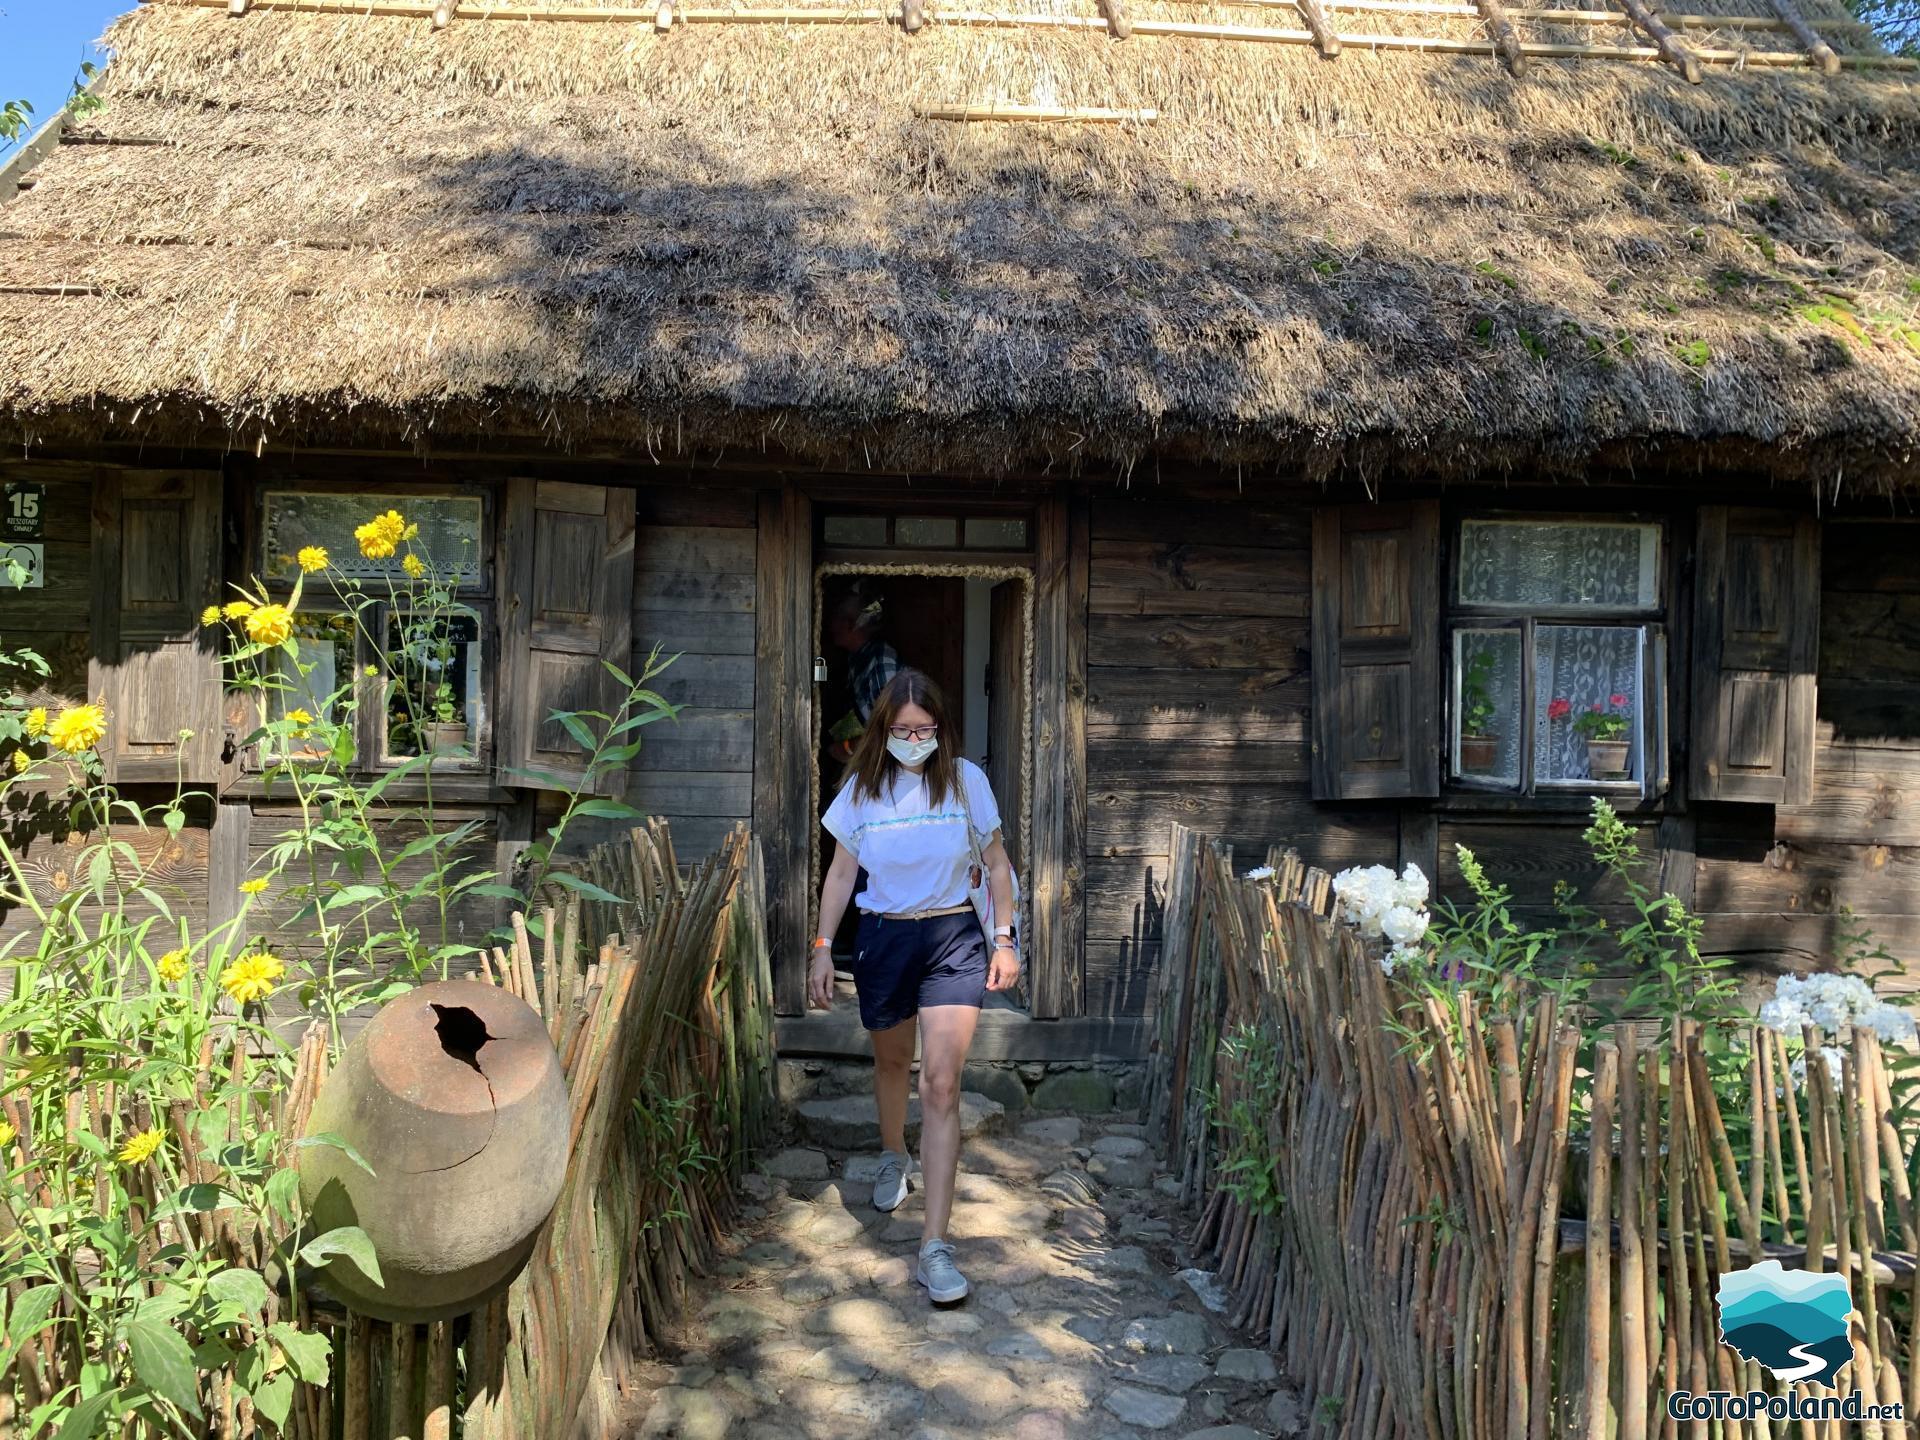 a woman is coming out of a peasant hut with thatched roof, on both sides of the path to the hut there is a fence made of branches